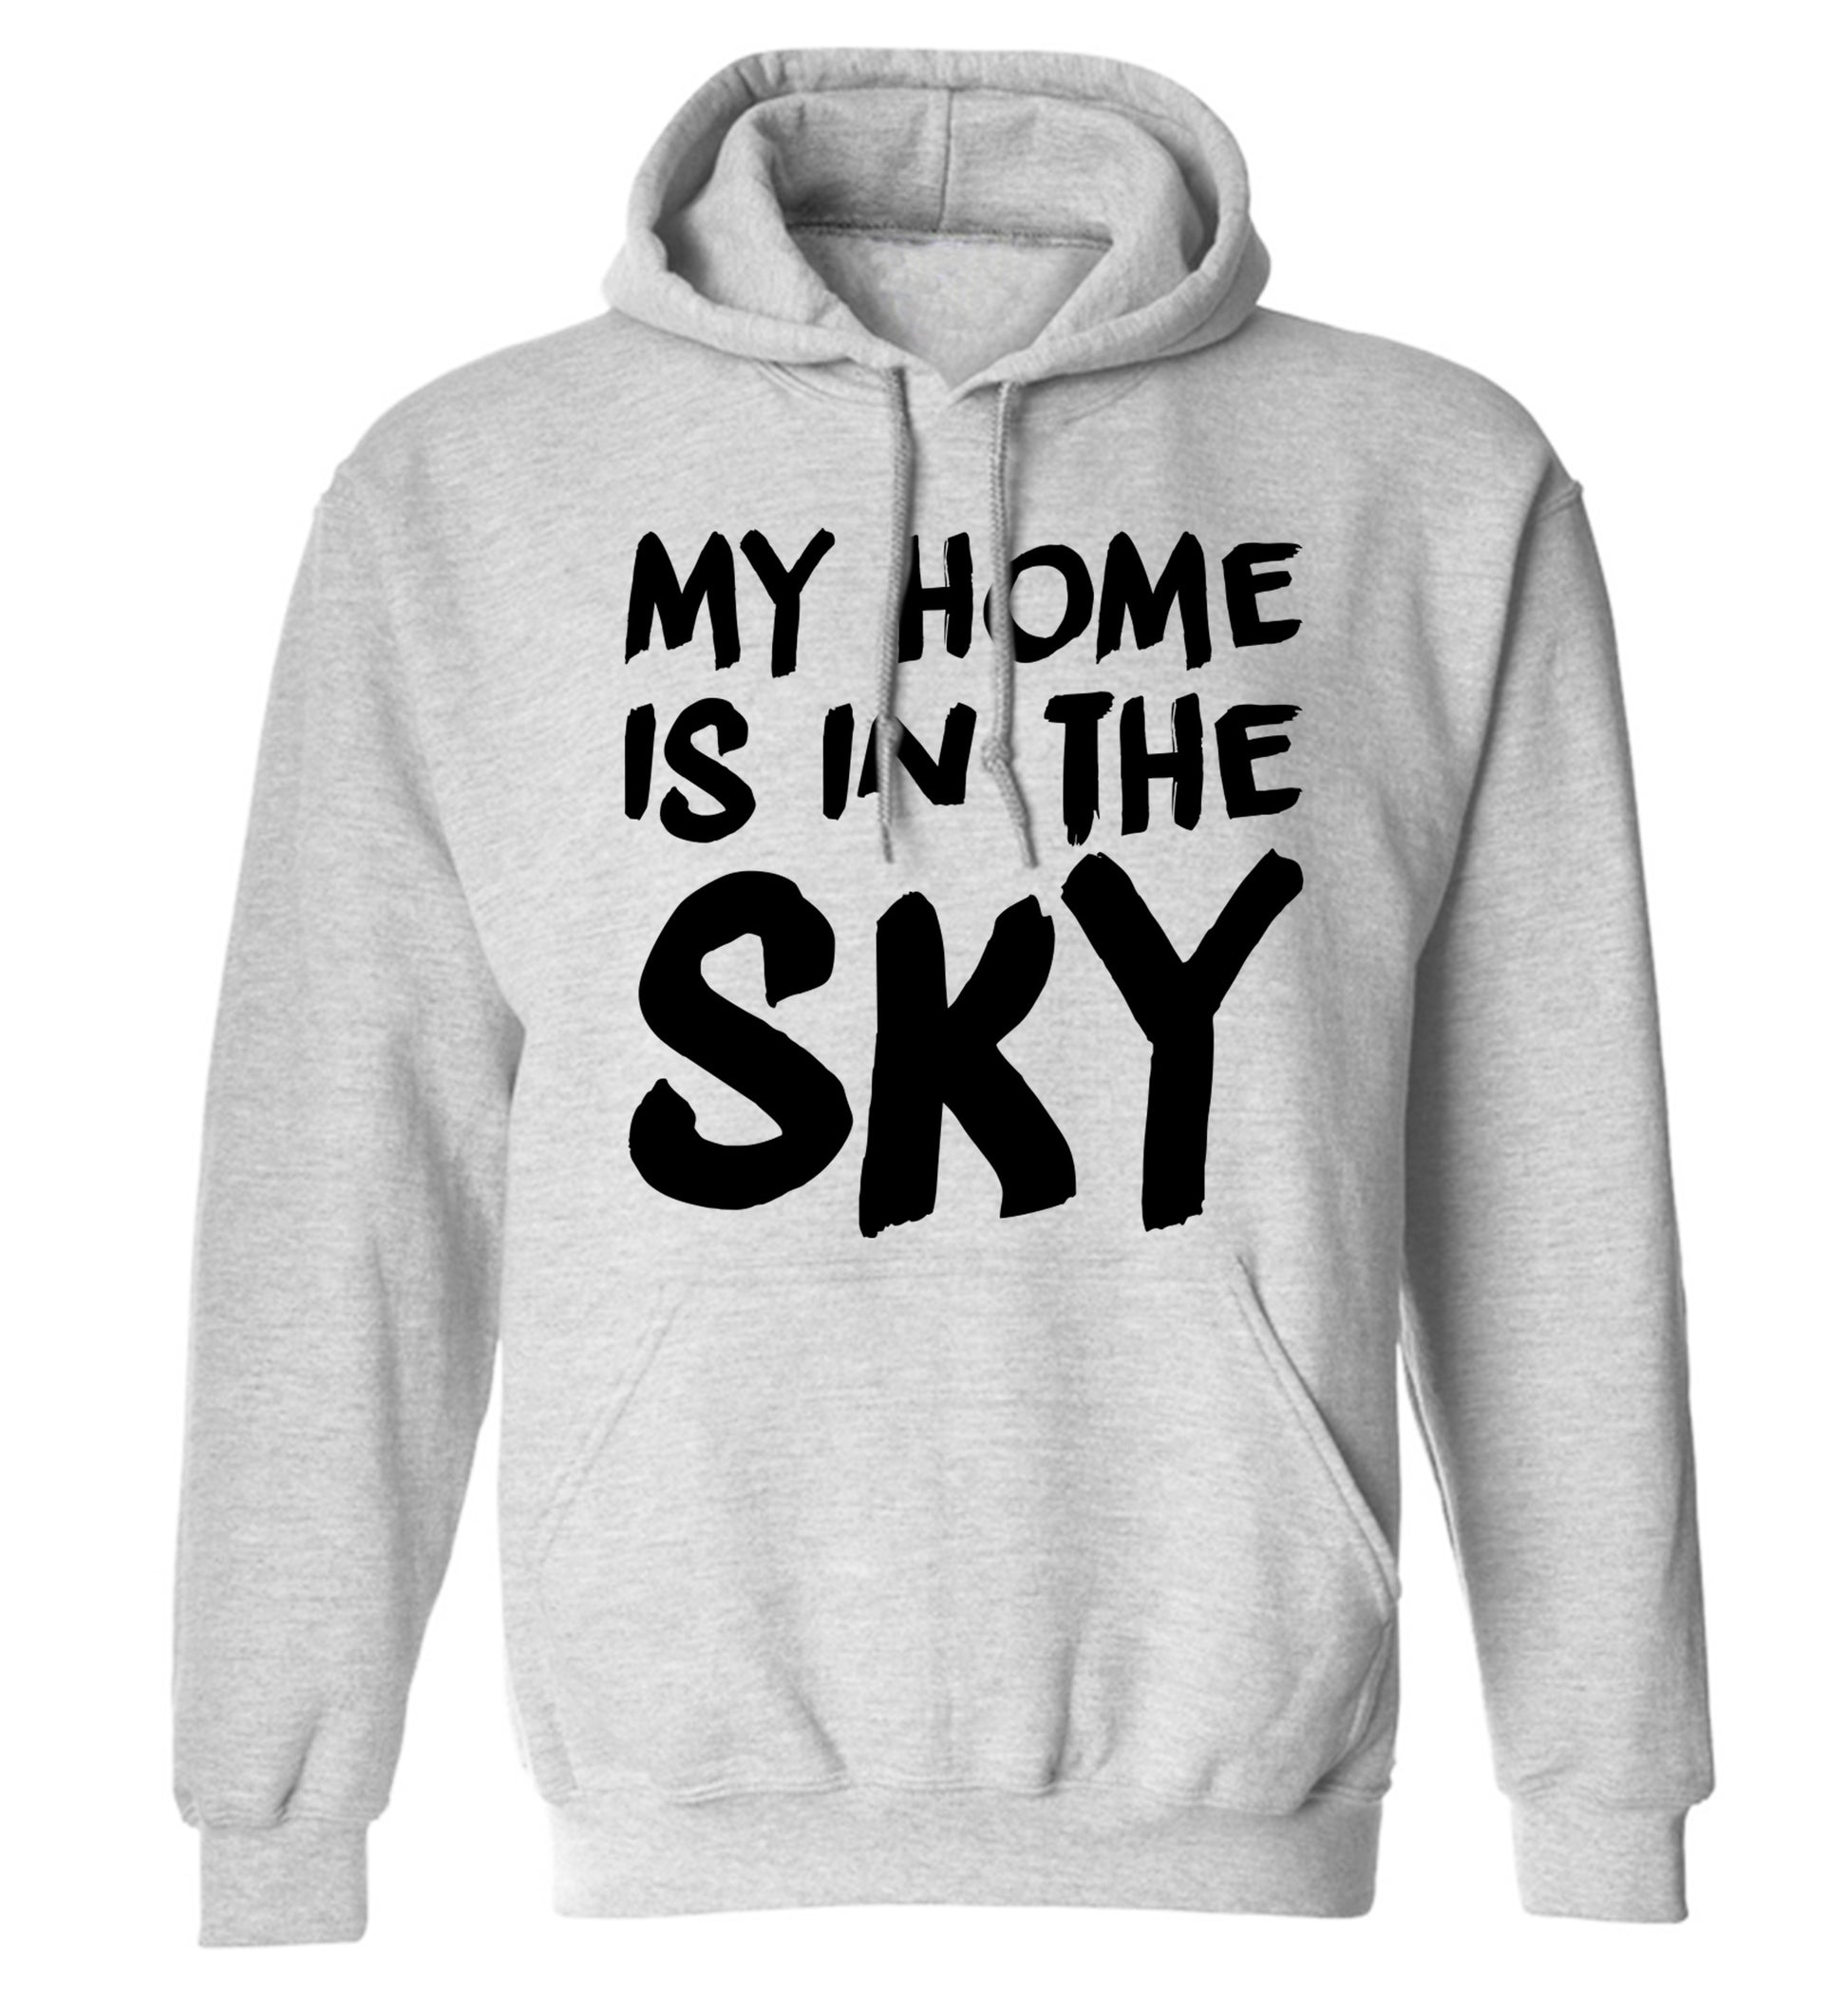 My home is in the sky adults unisex grey hoodie 2XL